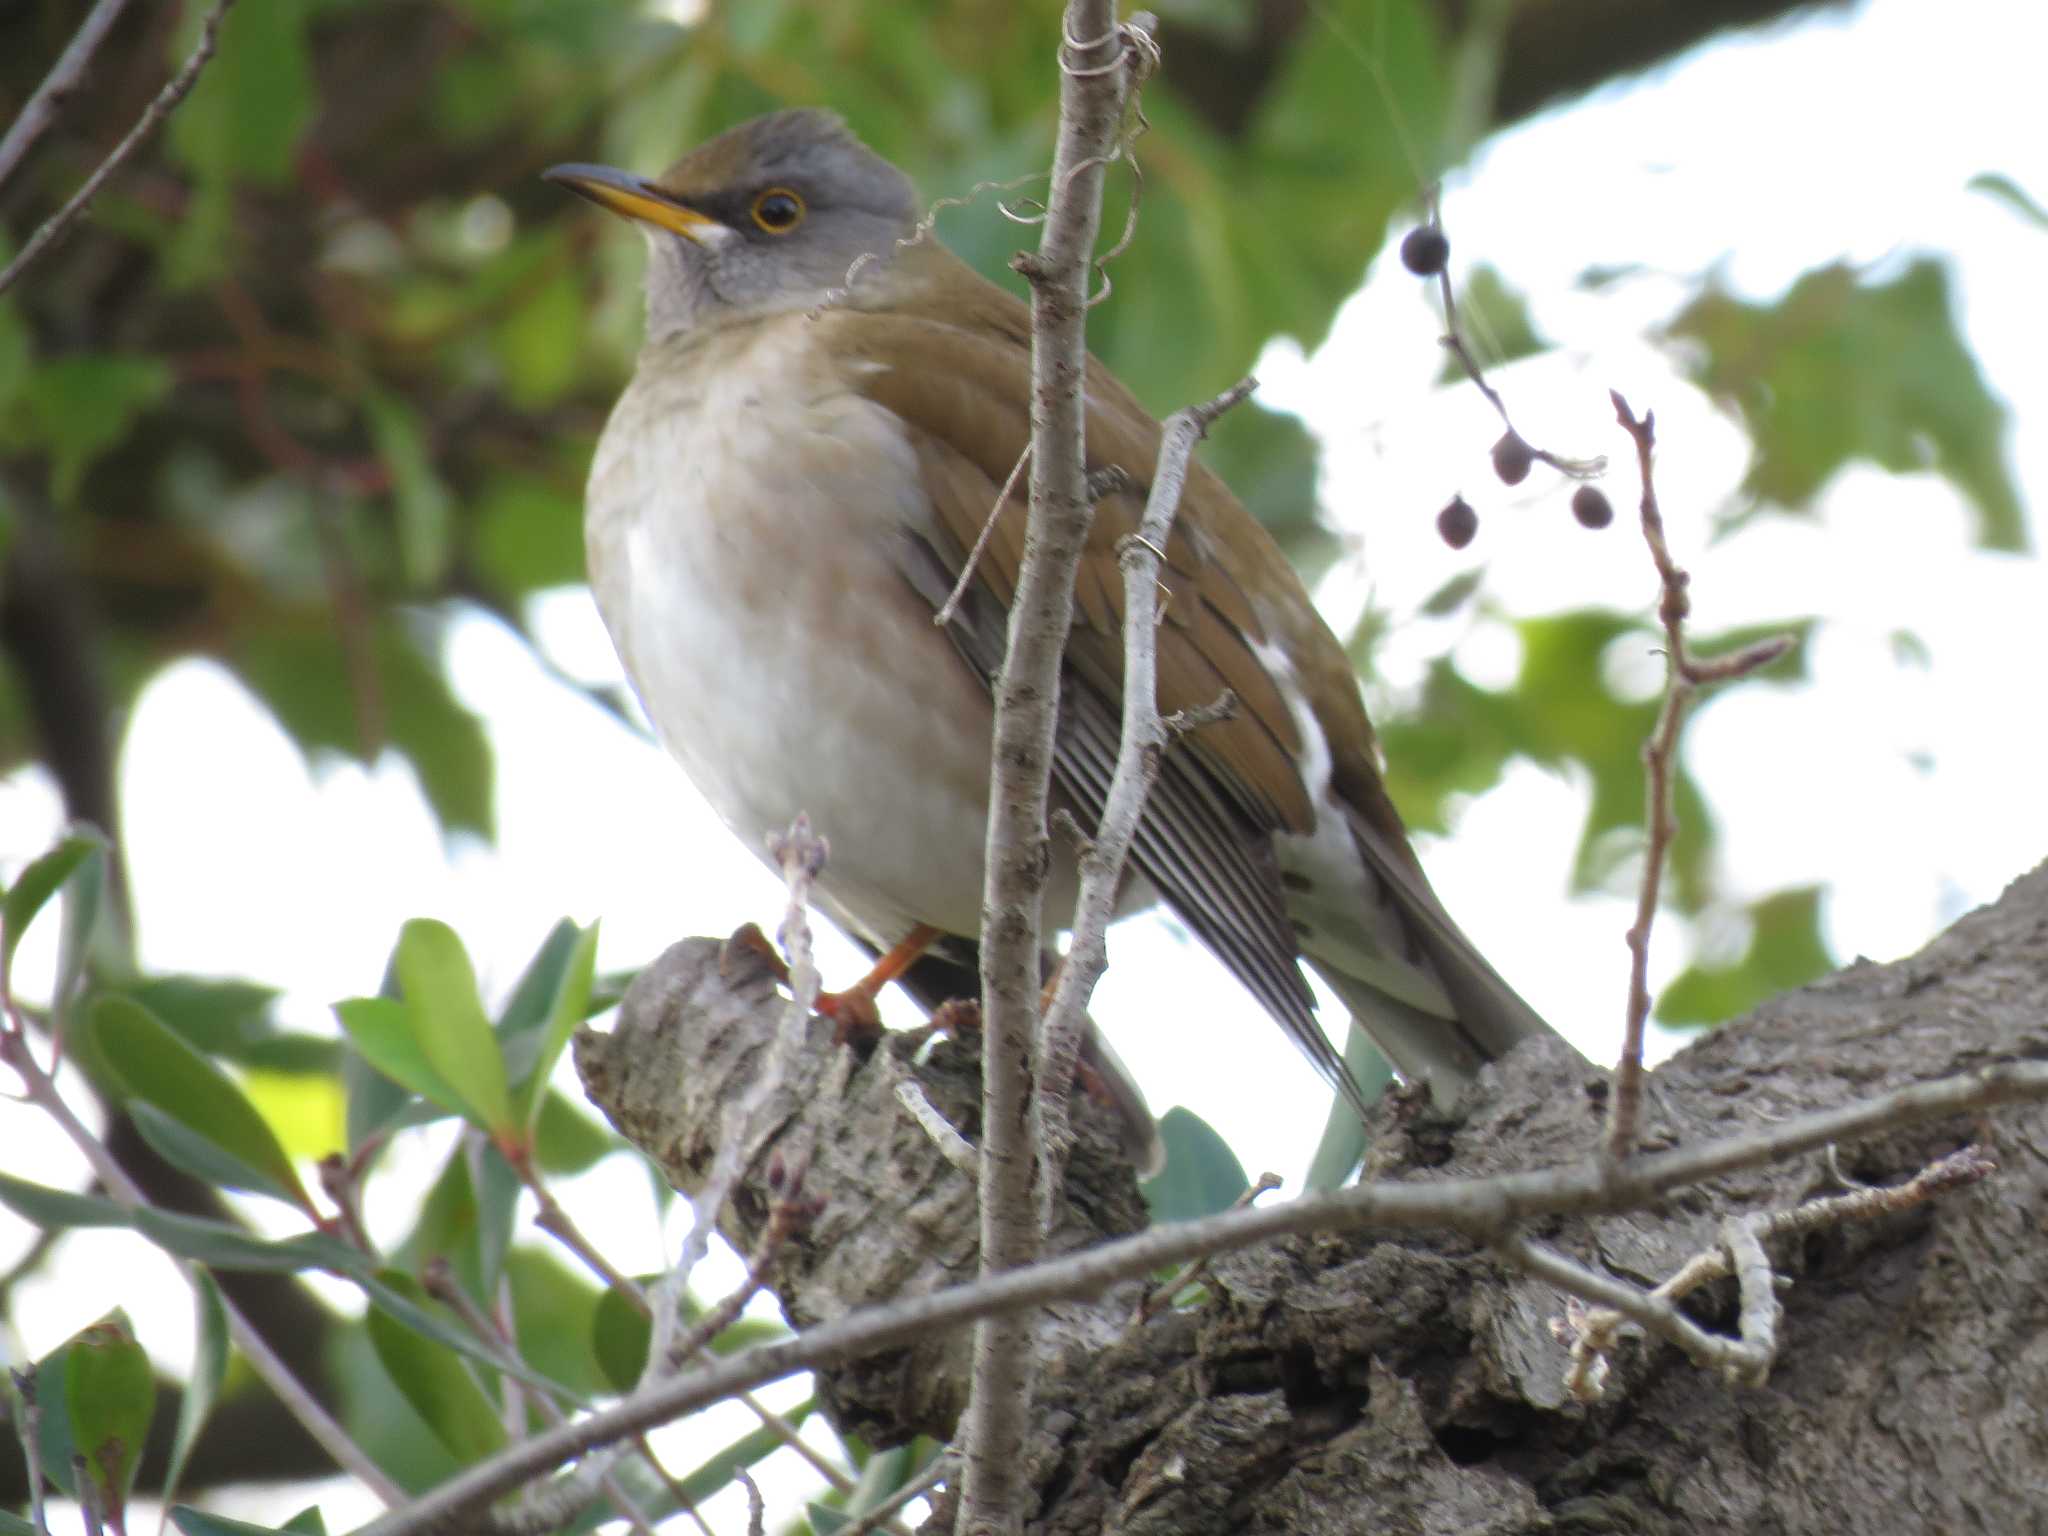 Photo of Pale Thrush at 名古屋市瑞穂区陸上競技場 by Mysteriously Unnamed